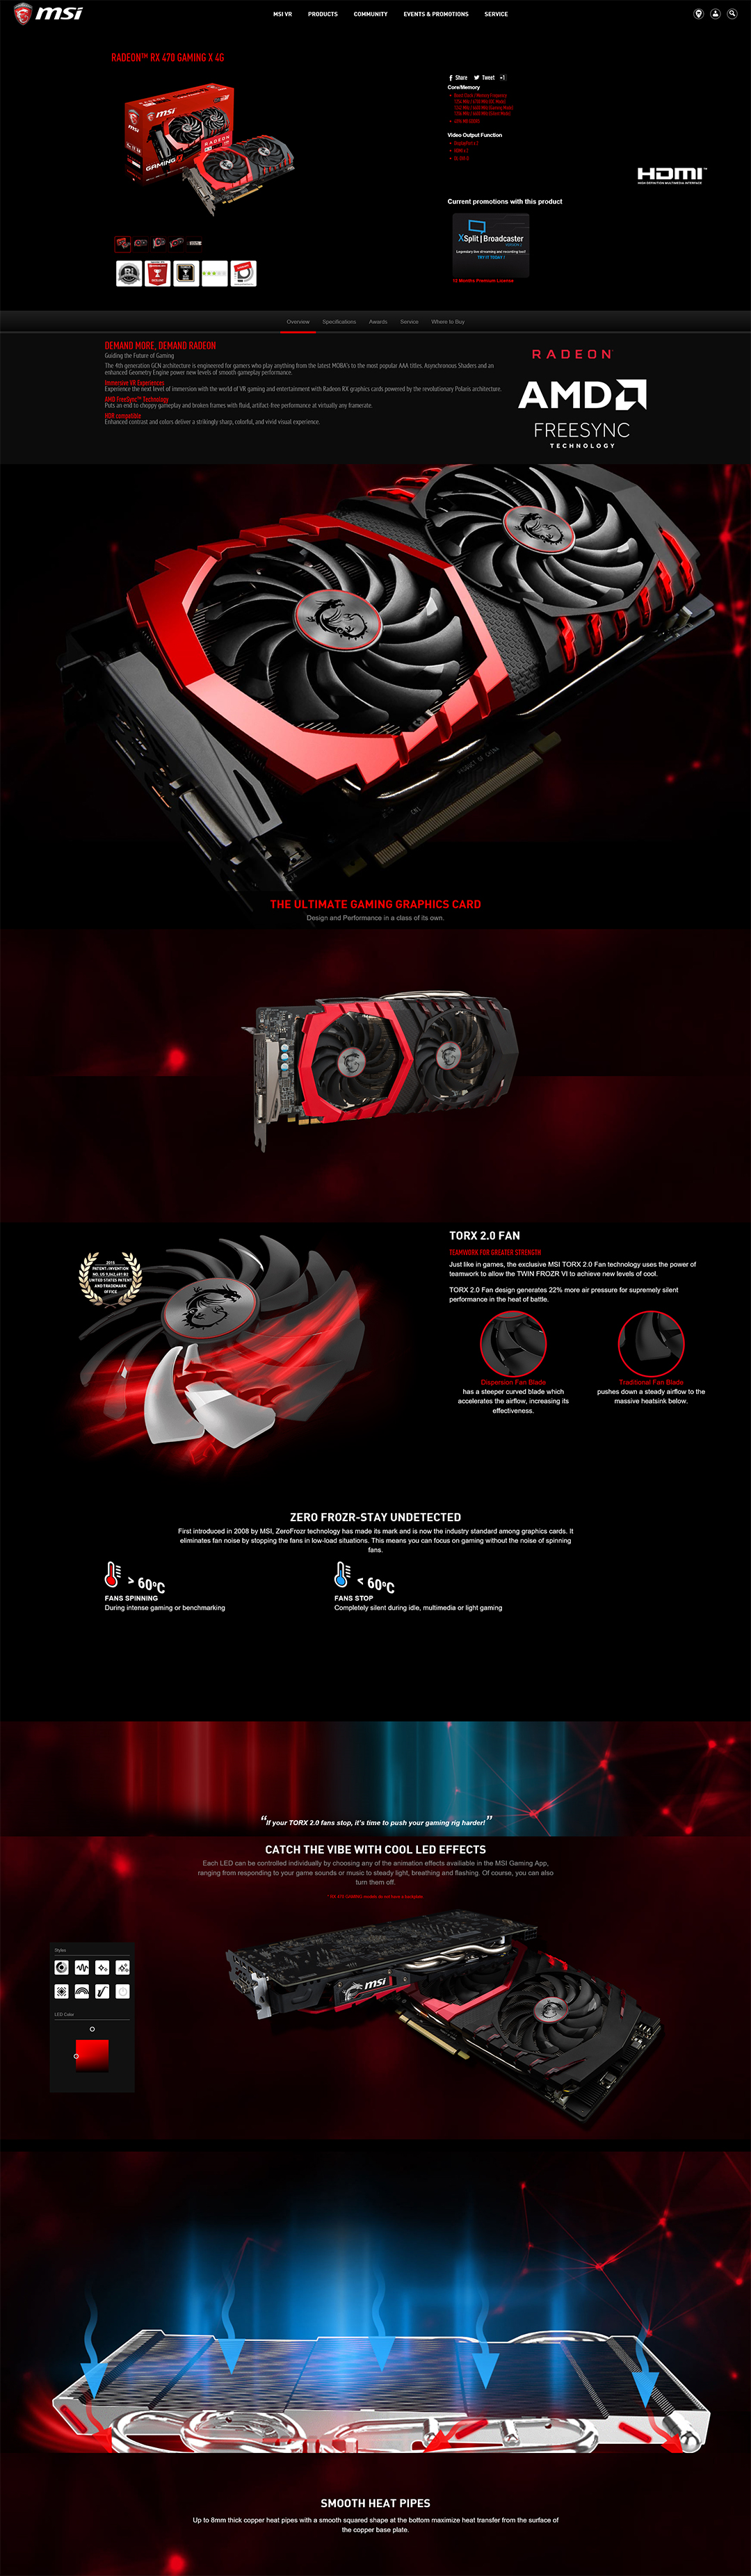 spec2 MSI Radeon RX 470 GAMING X 4G Review